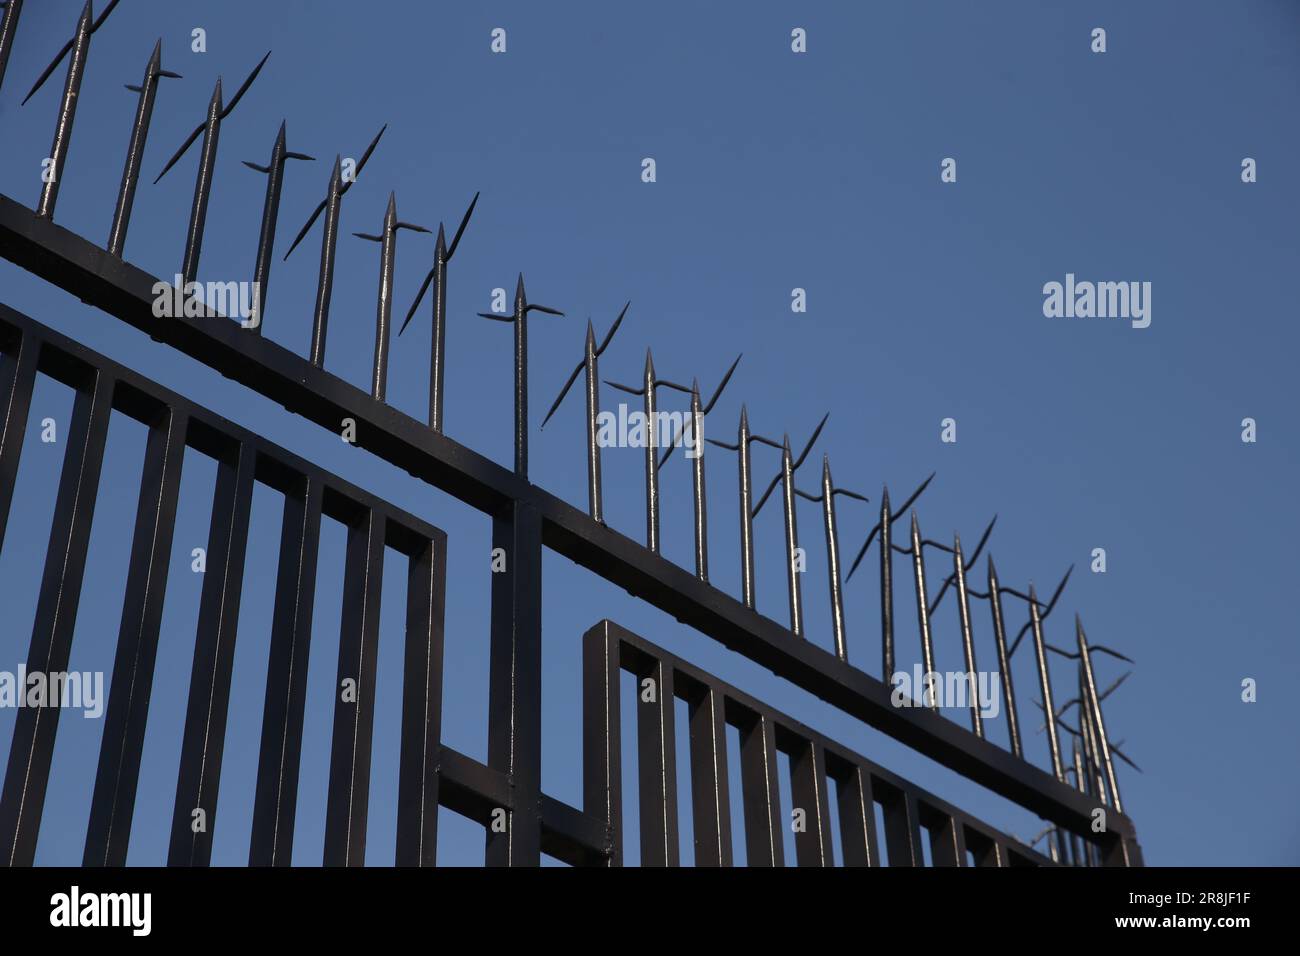 Spiky metal barrier and clear sky, low angle view image Stock Photo